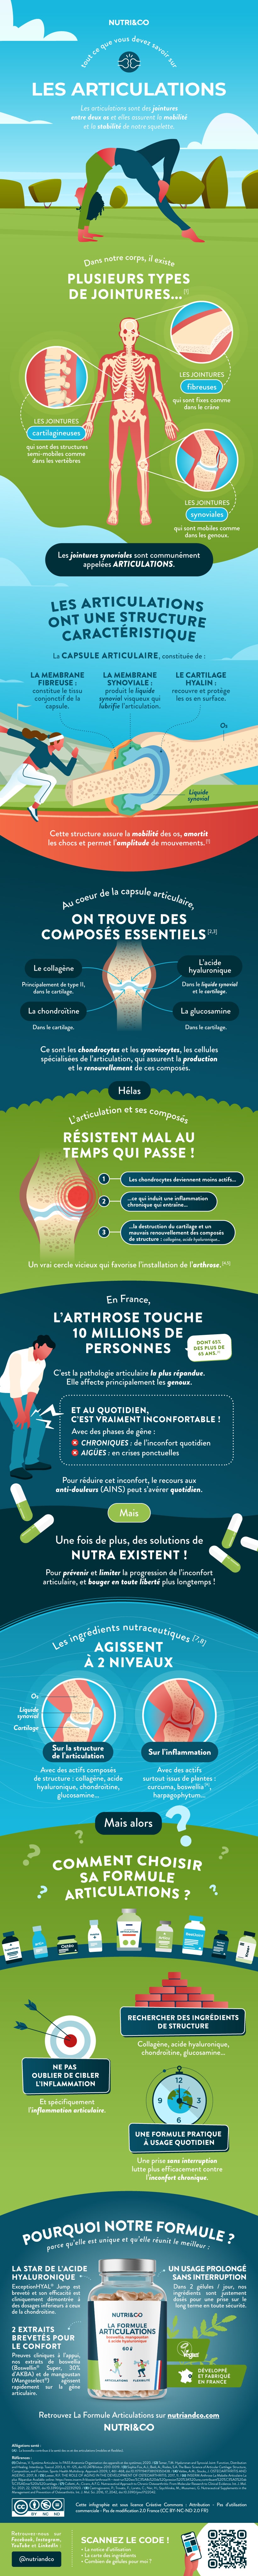 Infographie articulations